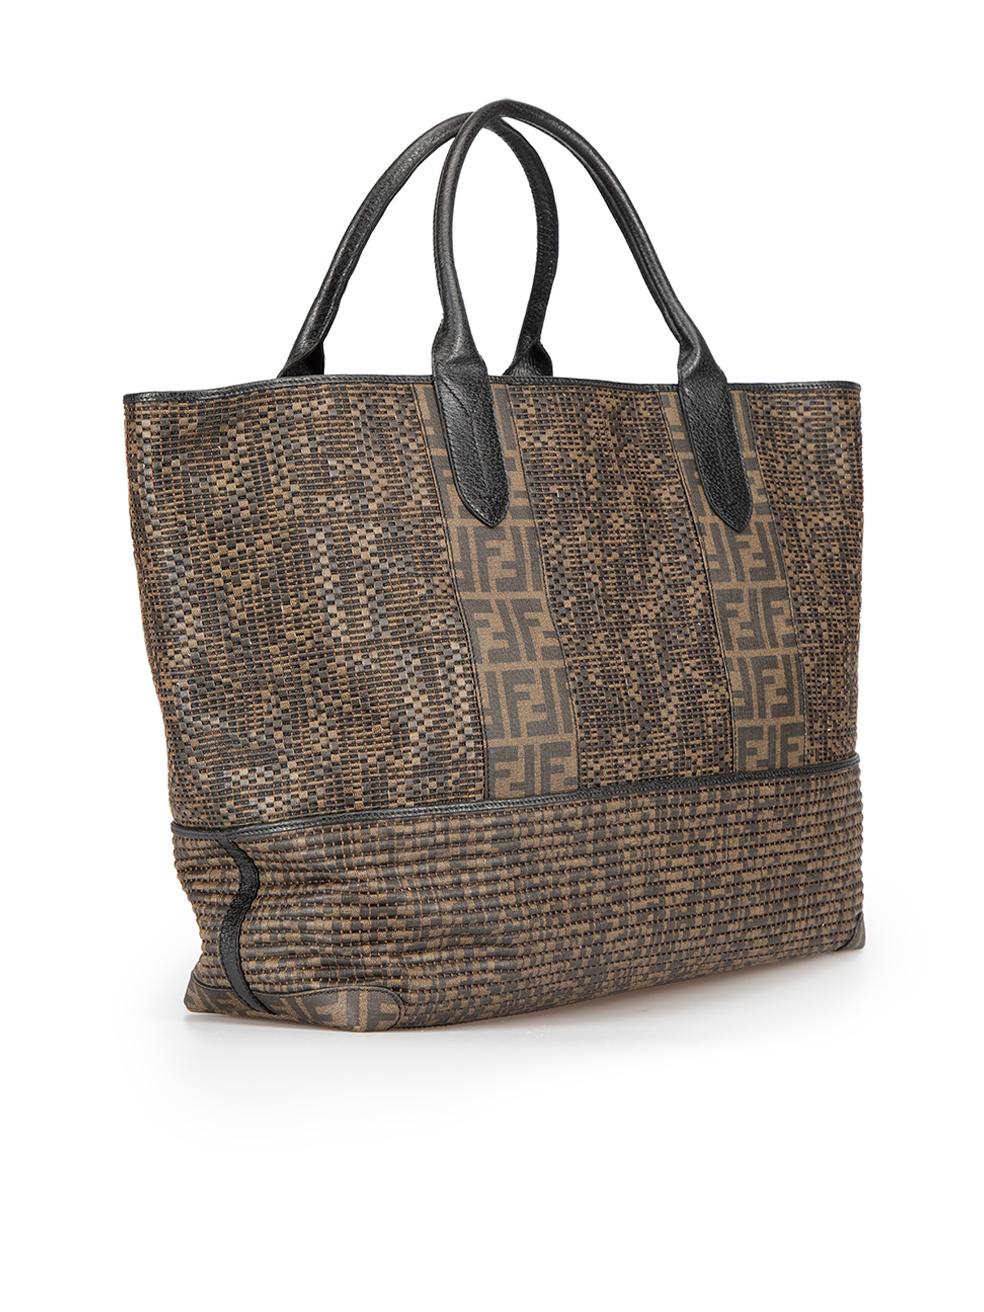 CONDITION is Never Worn. No visible wear to tote bag is evident on this used Fendi designer resale item. This item comes with original dustbag.



Details


Brown

Coated canvas

Large tote bag

Woven accent

FF zucca print pattern trimmings

2x